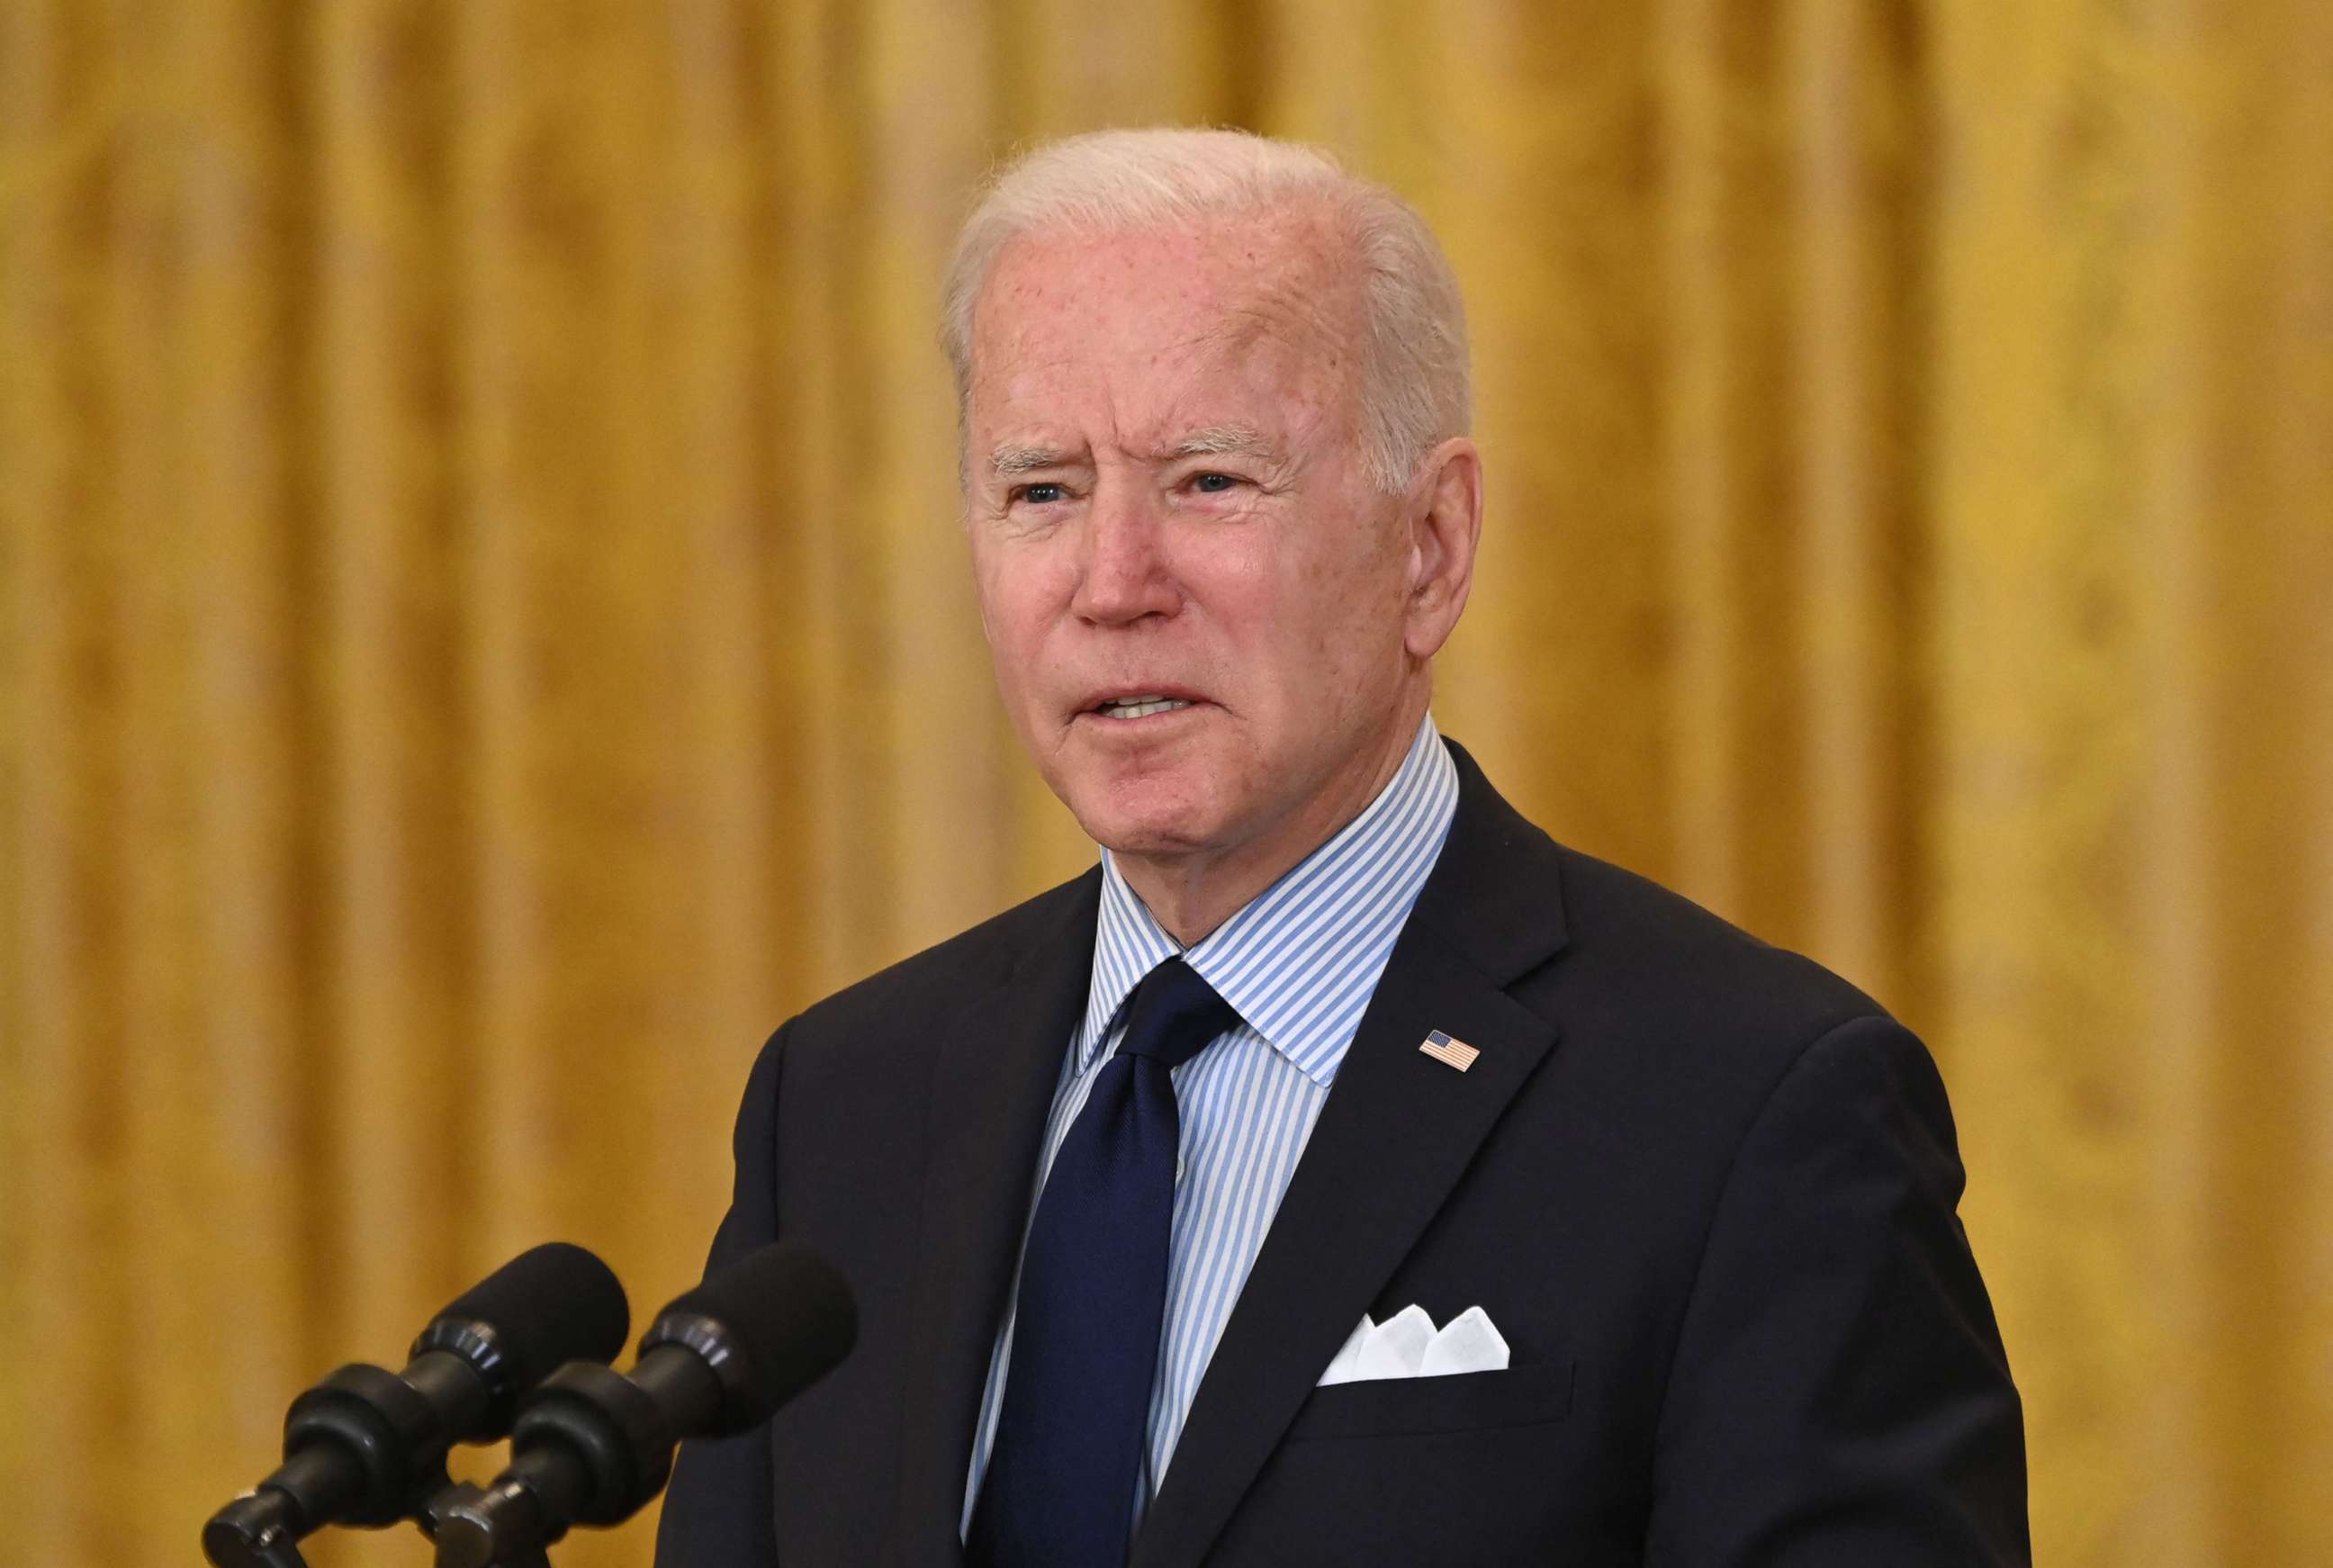 PHOTO: President Joe Biden speaks about the April jobs report in the East Room of the White House in Washington on May 7, 2021.